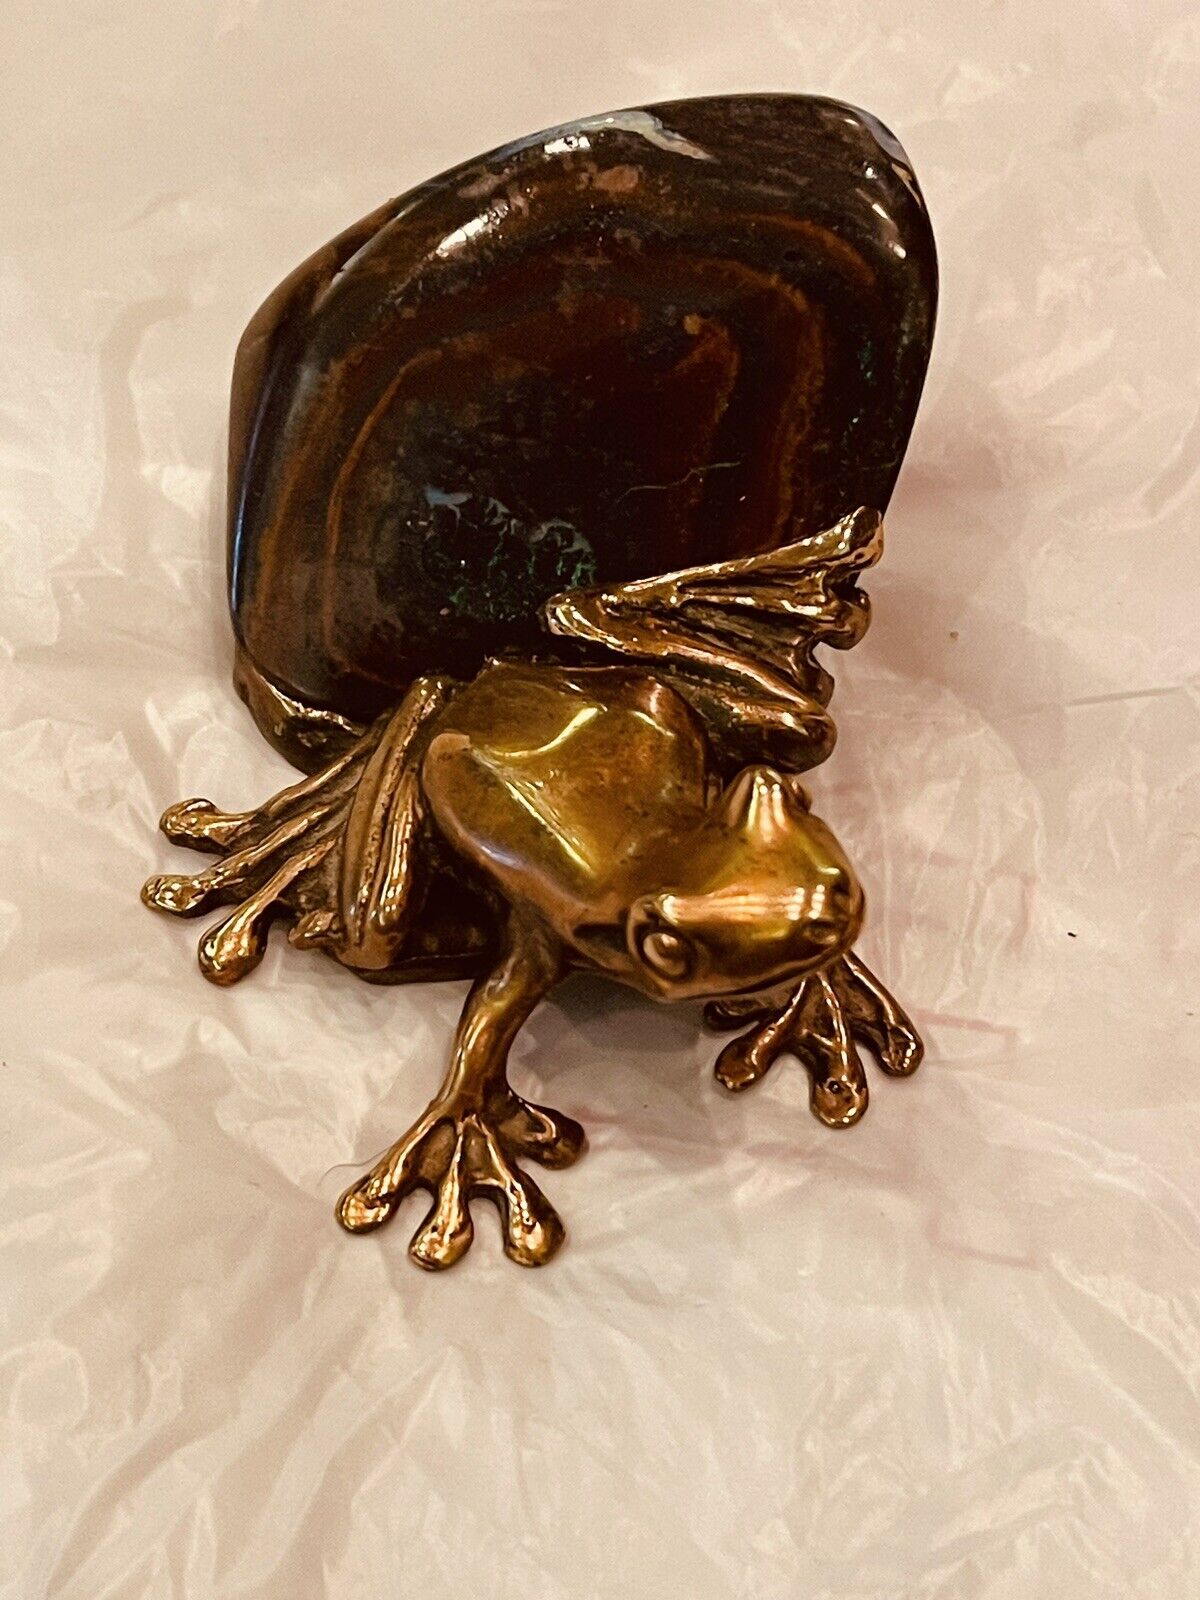 Bronze Shiny Tree Frog Sitting On A Real Boulder Opal Made In Australia Signed